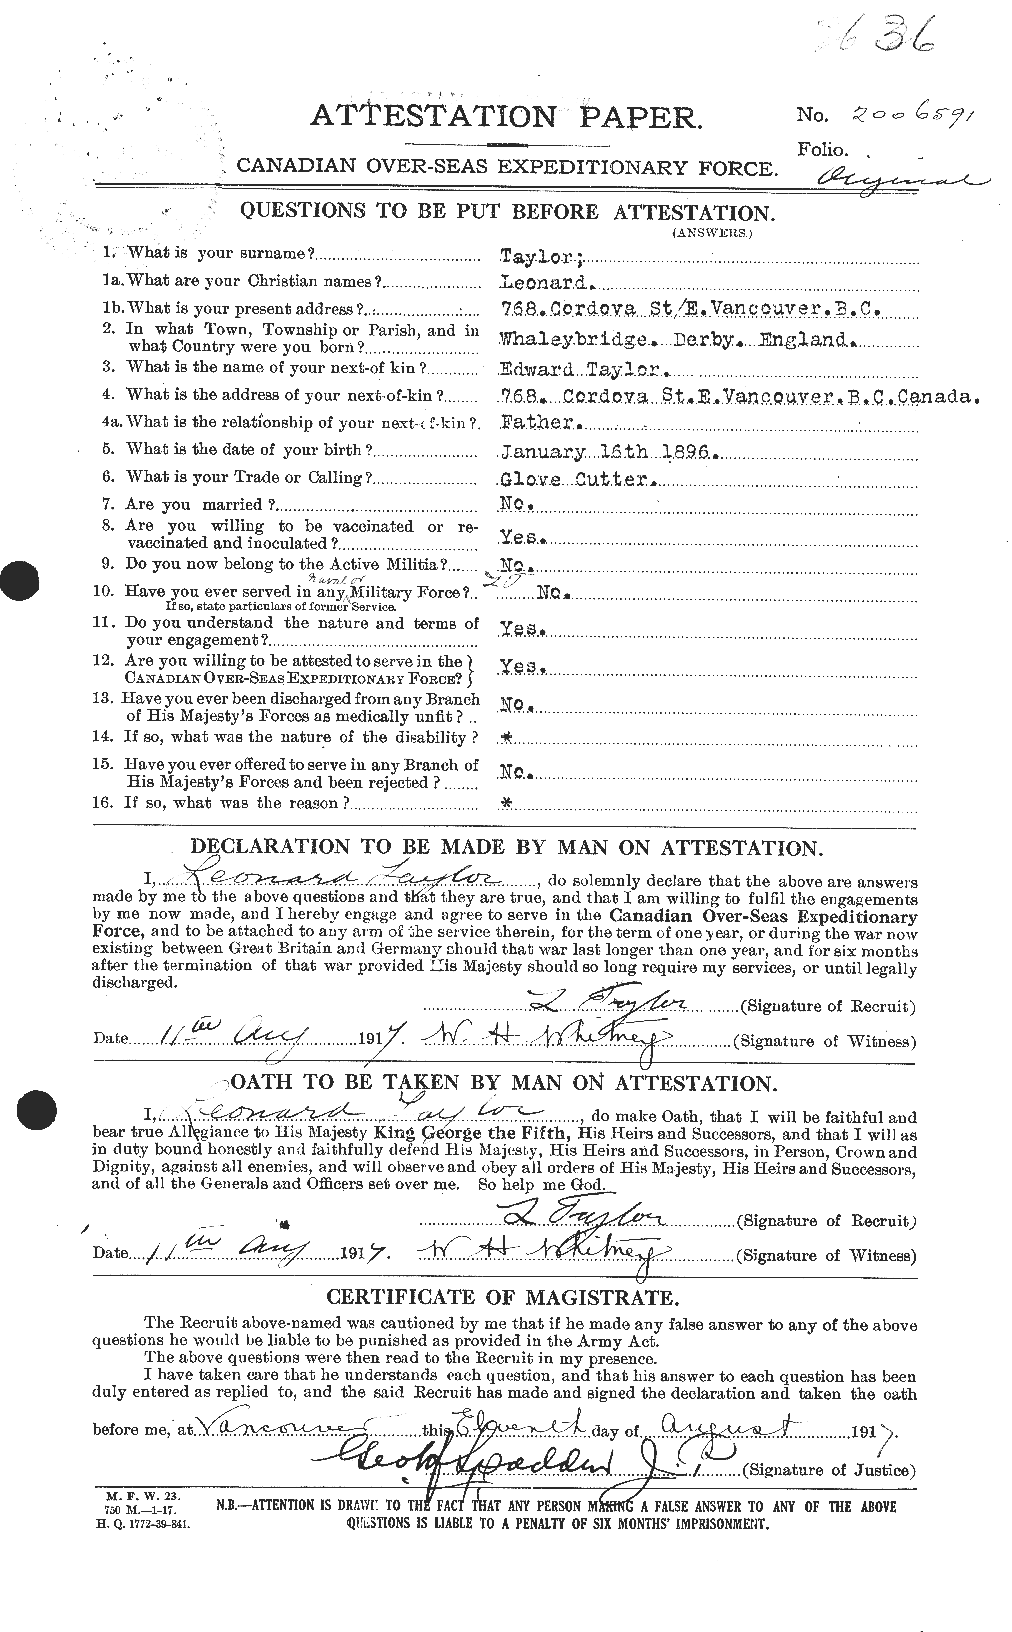 Personnel Records of the First World War - CEF 627622a